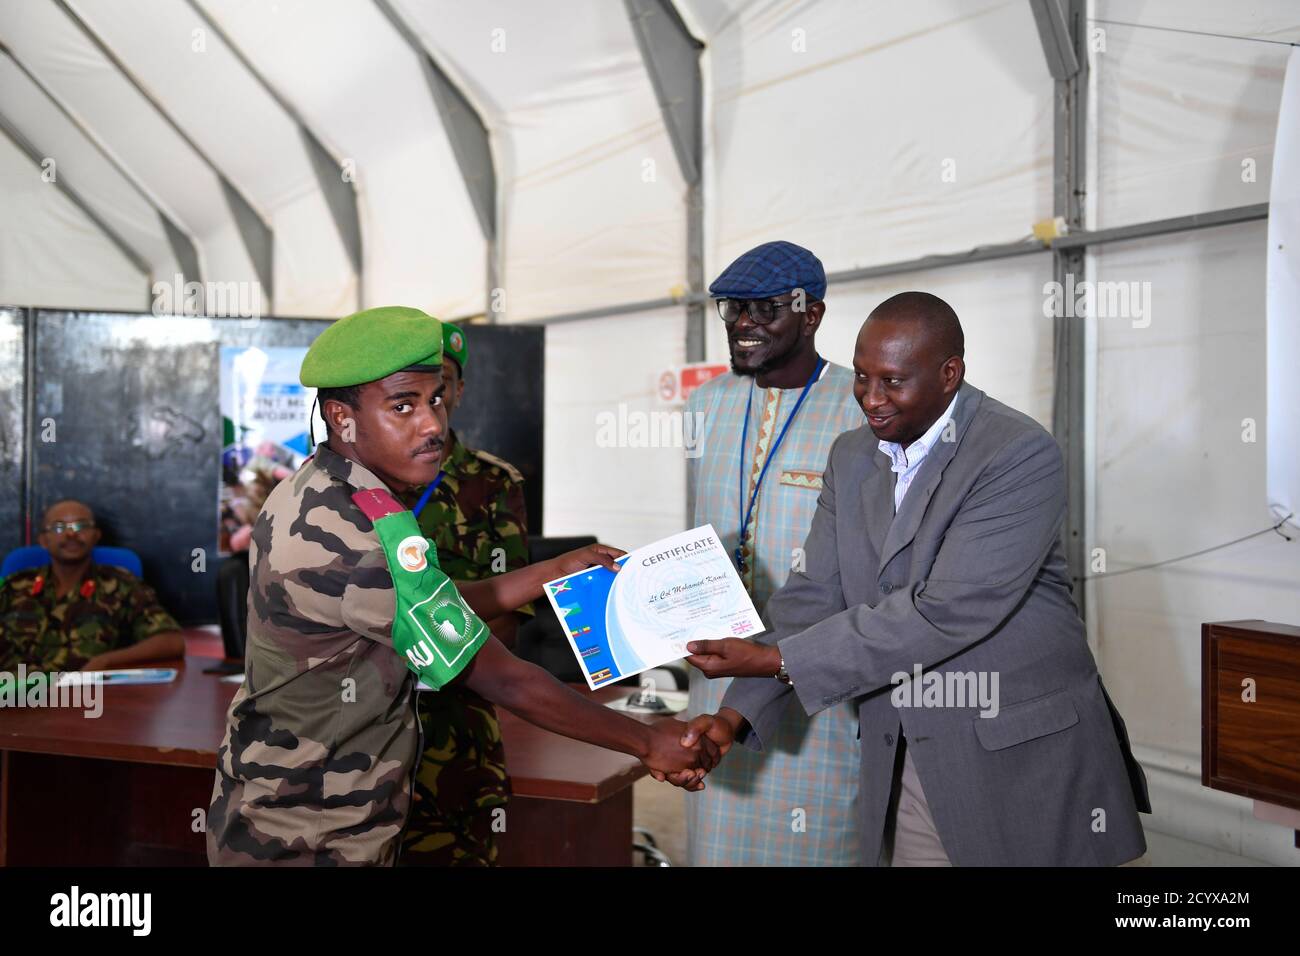 Mathias Ngarambe (right), Acting AMISOM's Head of Mission Support hands over a certificate to a medical officer at the end of a medical workshop jointly organized by the UNSOS and AMISOM in Mogadishu on 12 September 2018. Stock Photo